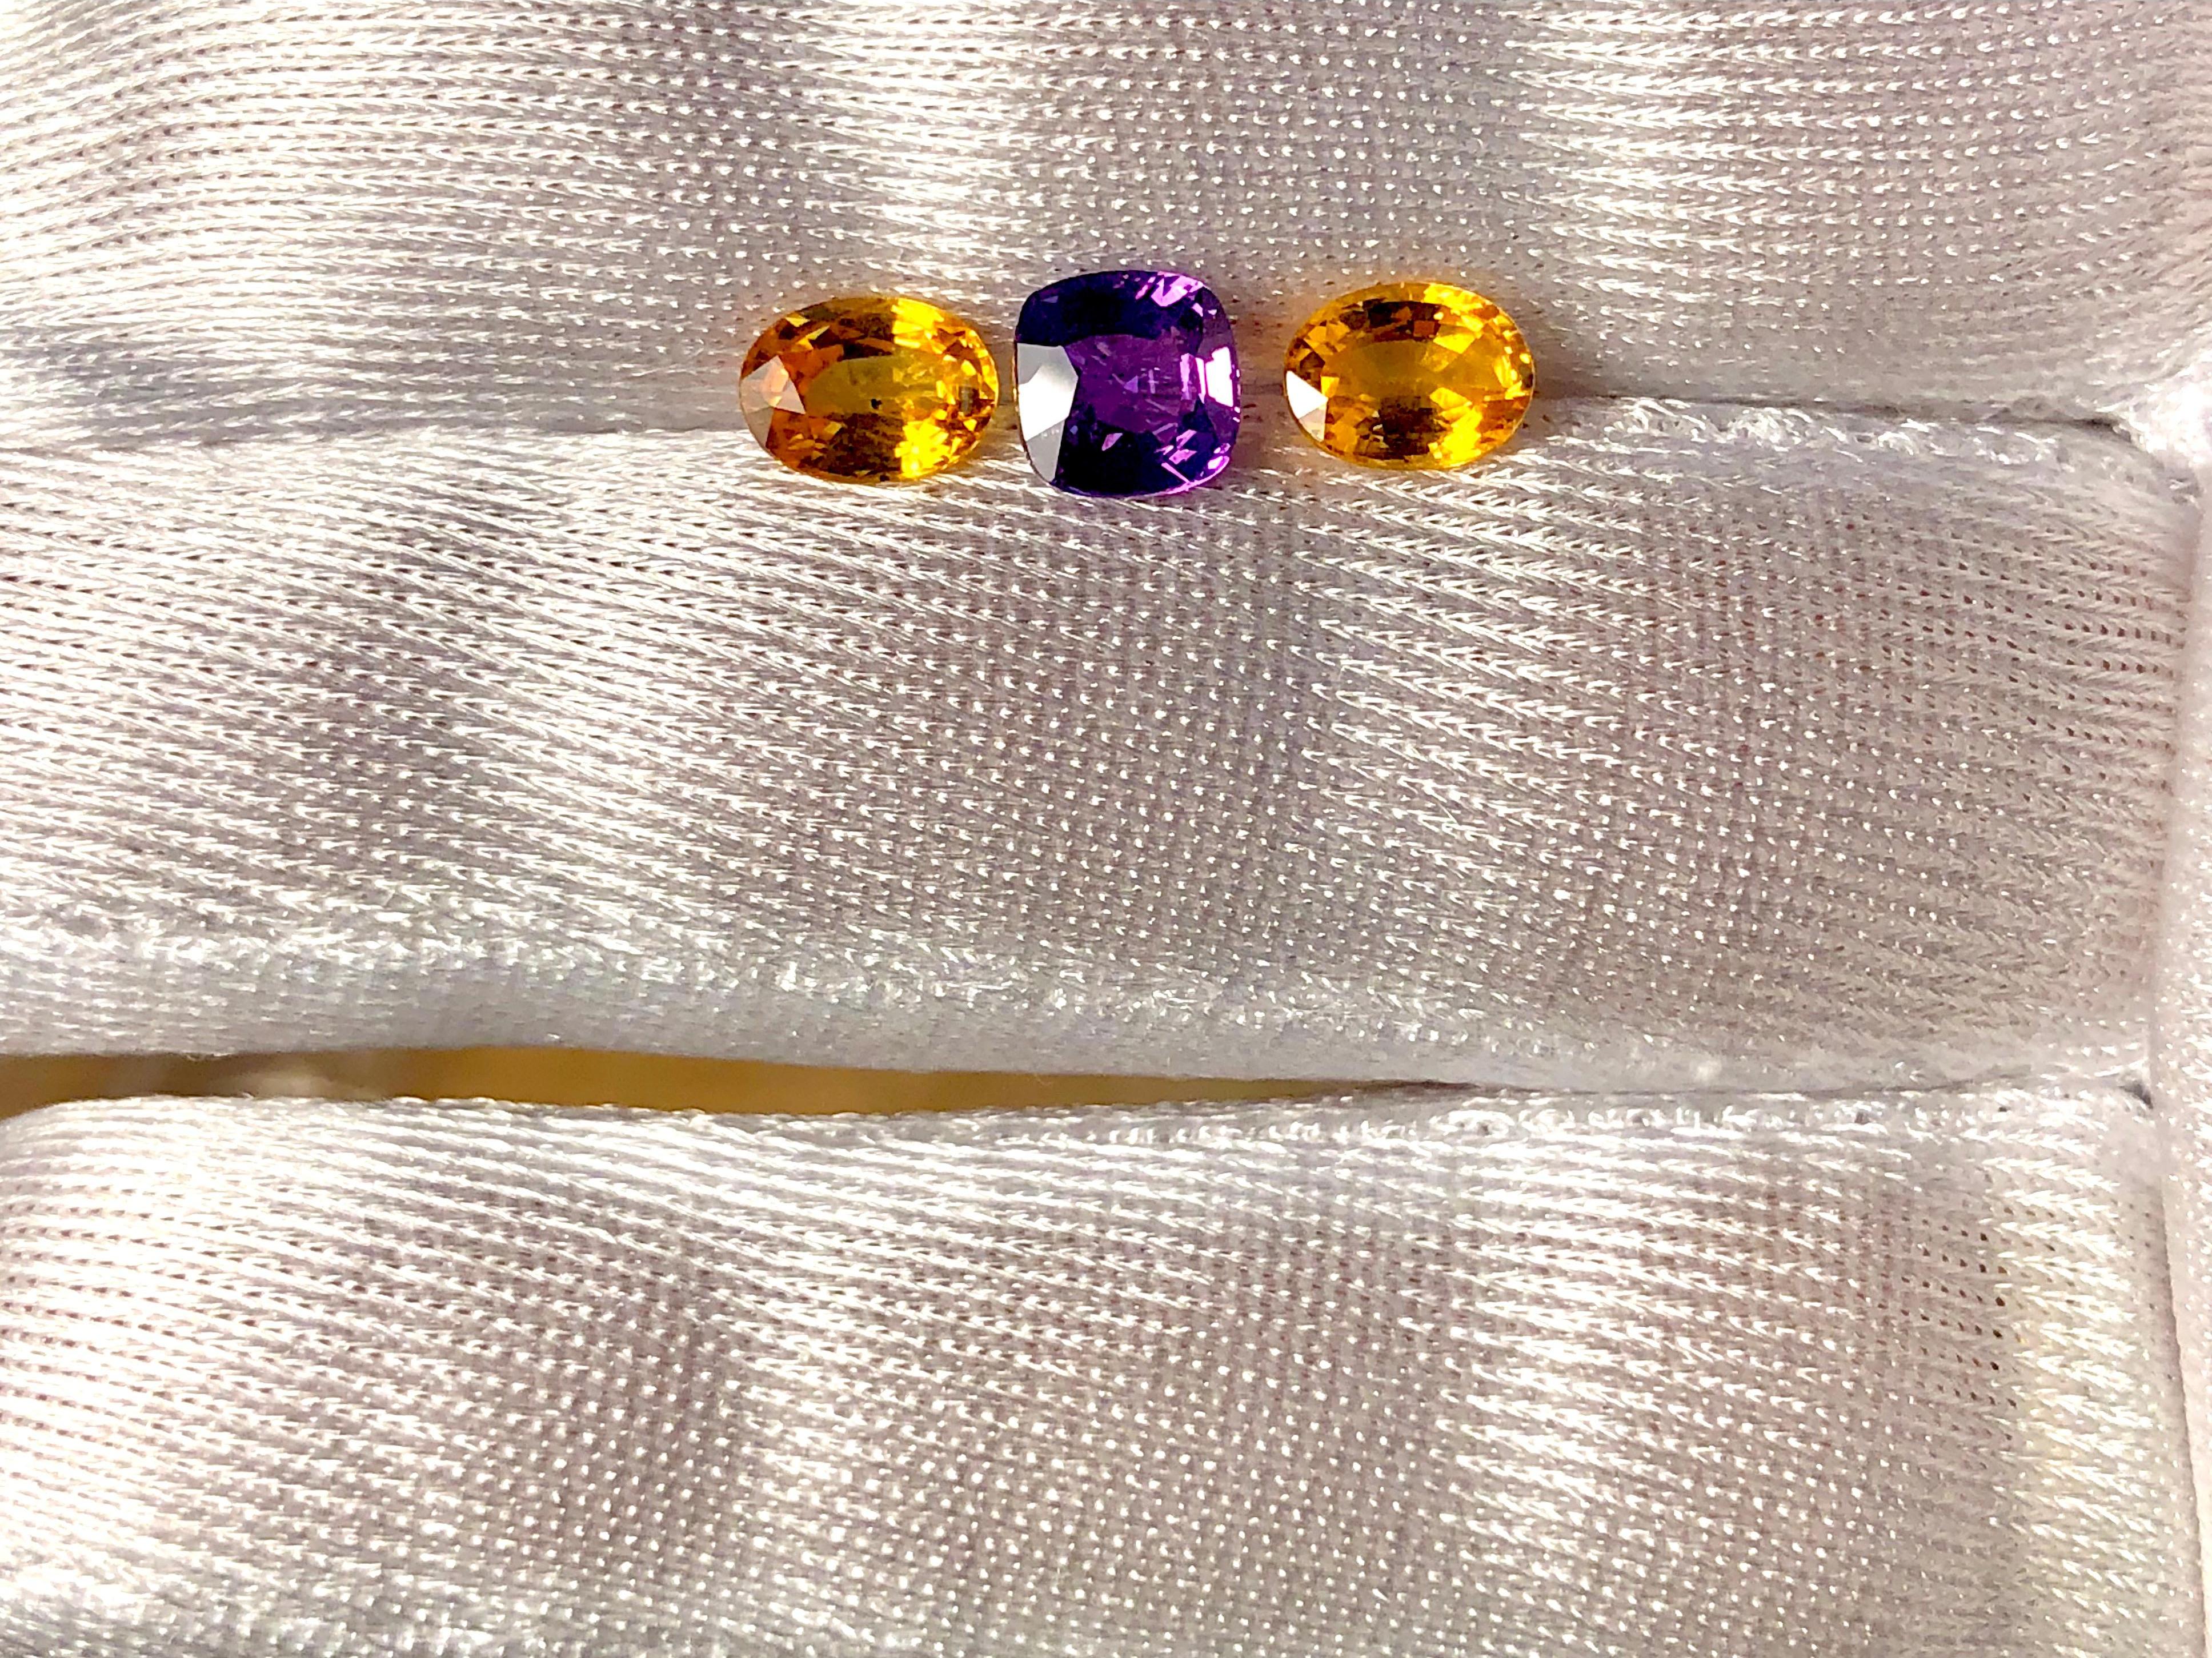 Three stone sapphires with a center high-quality cushion cut purple Ceylon sapphire 1.48 carats and two vibrant, yellow Ceylon oval cut sapphires weighing 2.18 carats.  
The trio of sapphires is of fine quality and clarity, with excellent cutting